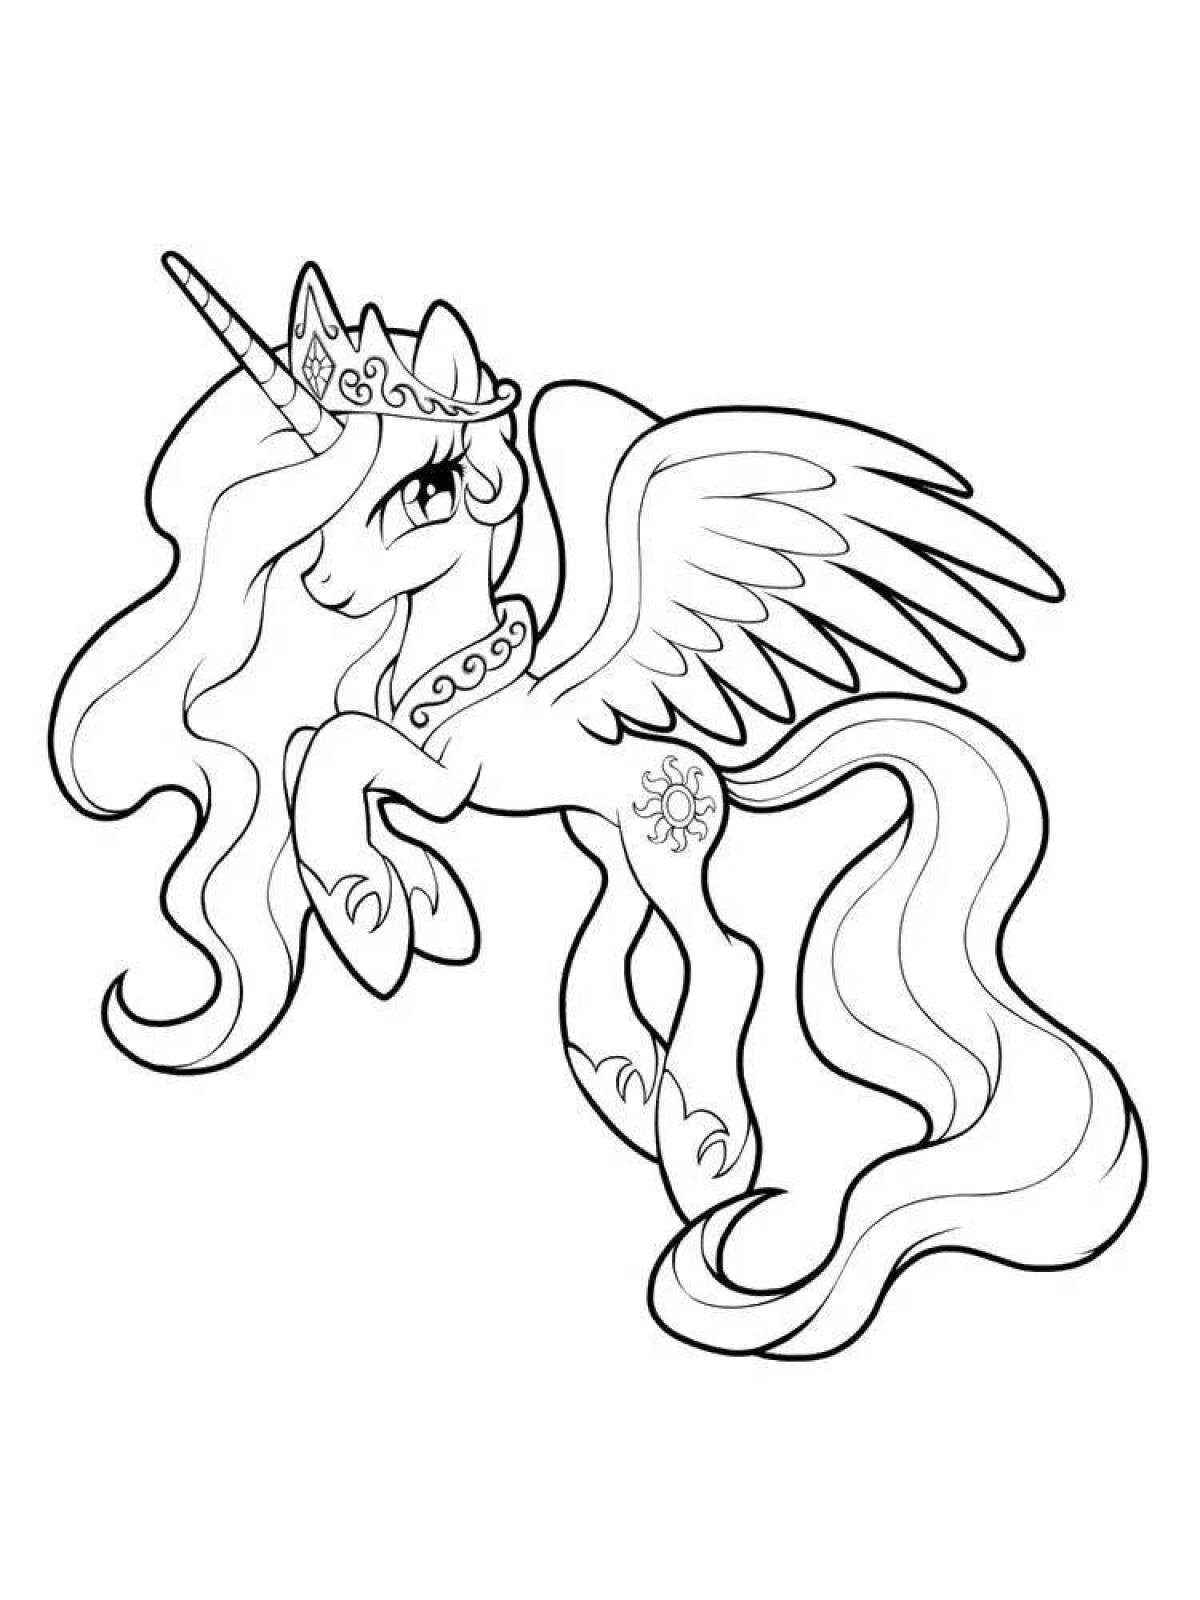 Exalted princess may little pony coloring page